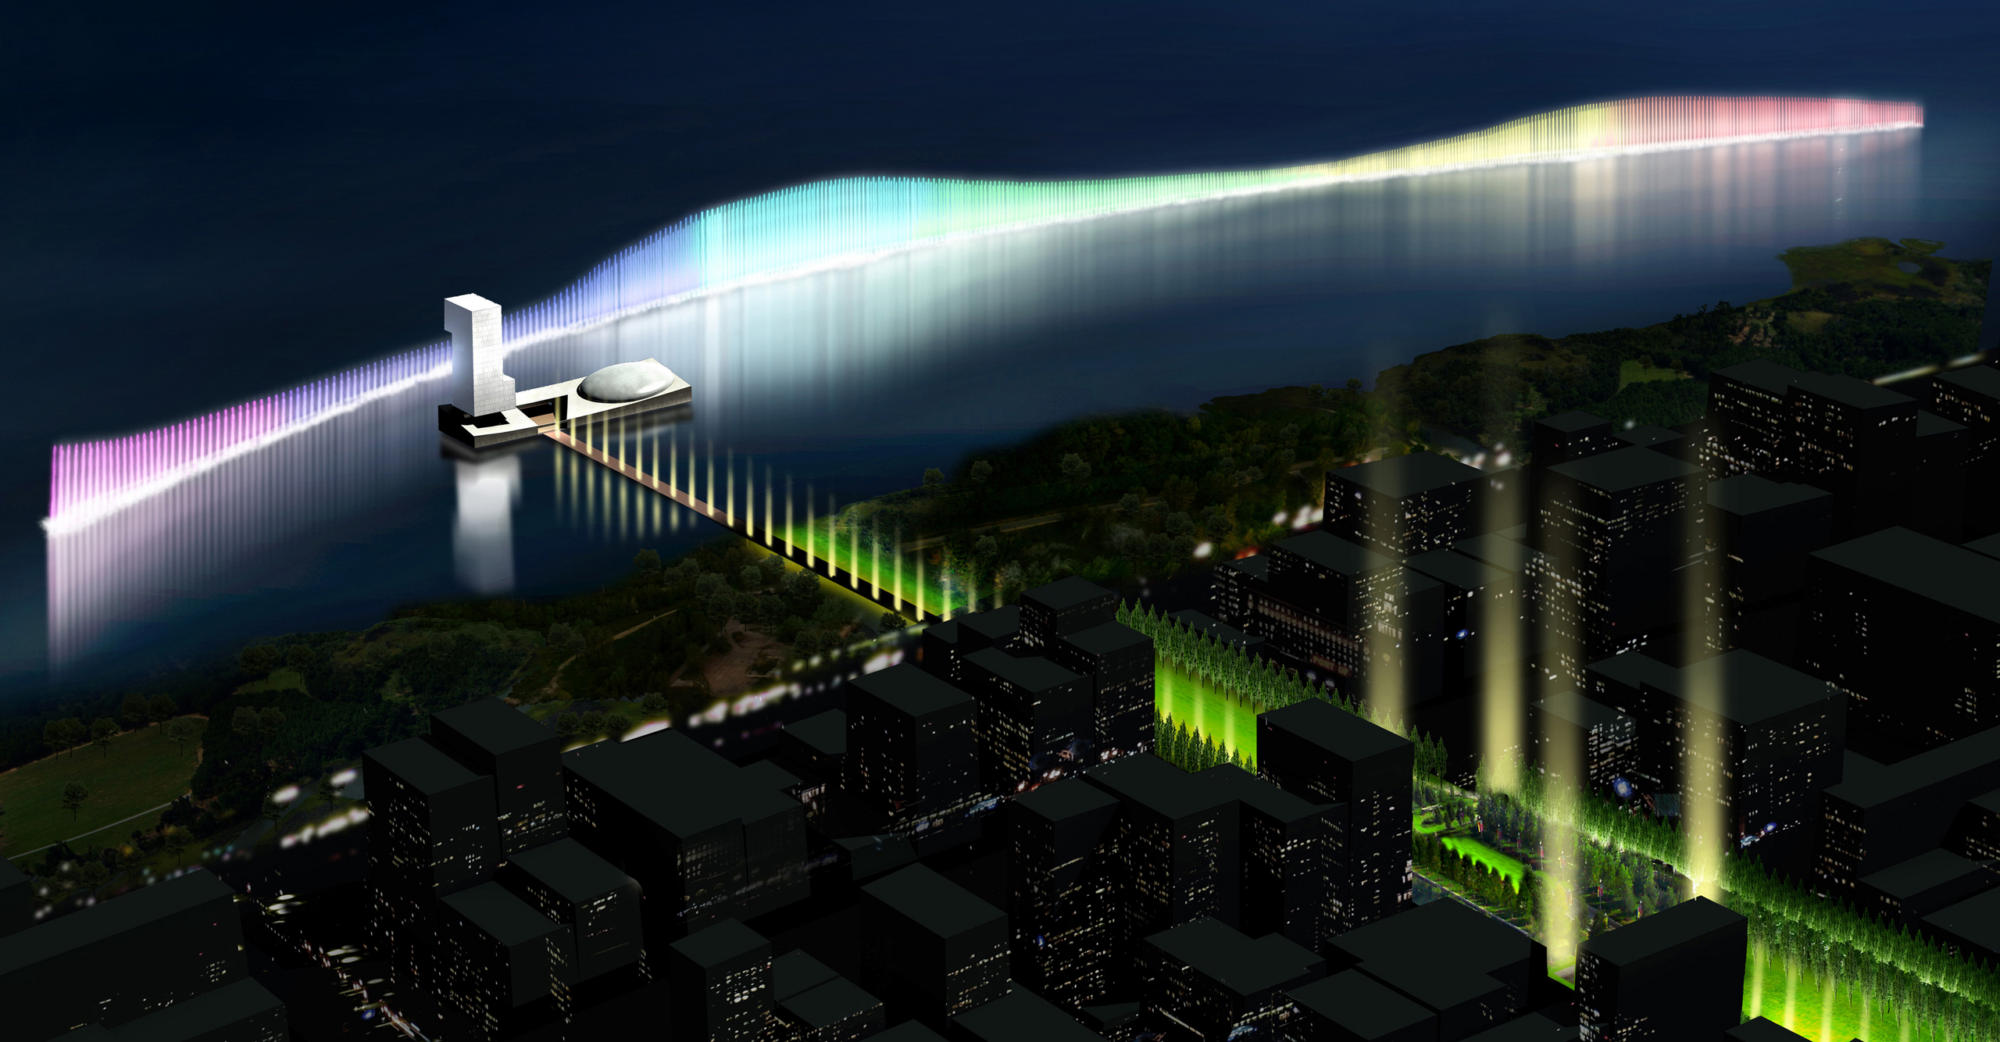 Wujiang New City planning project, China | WORKS | 